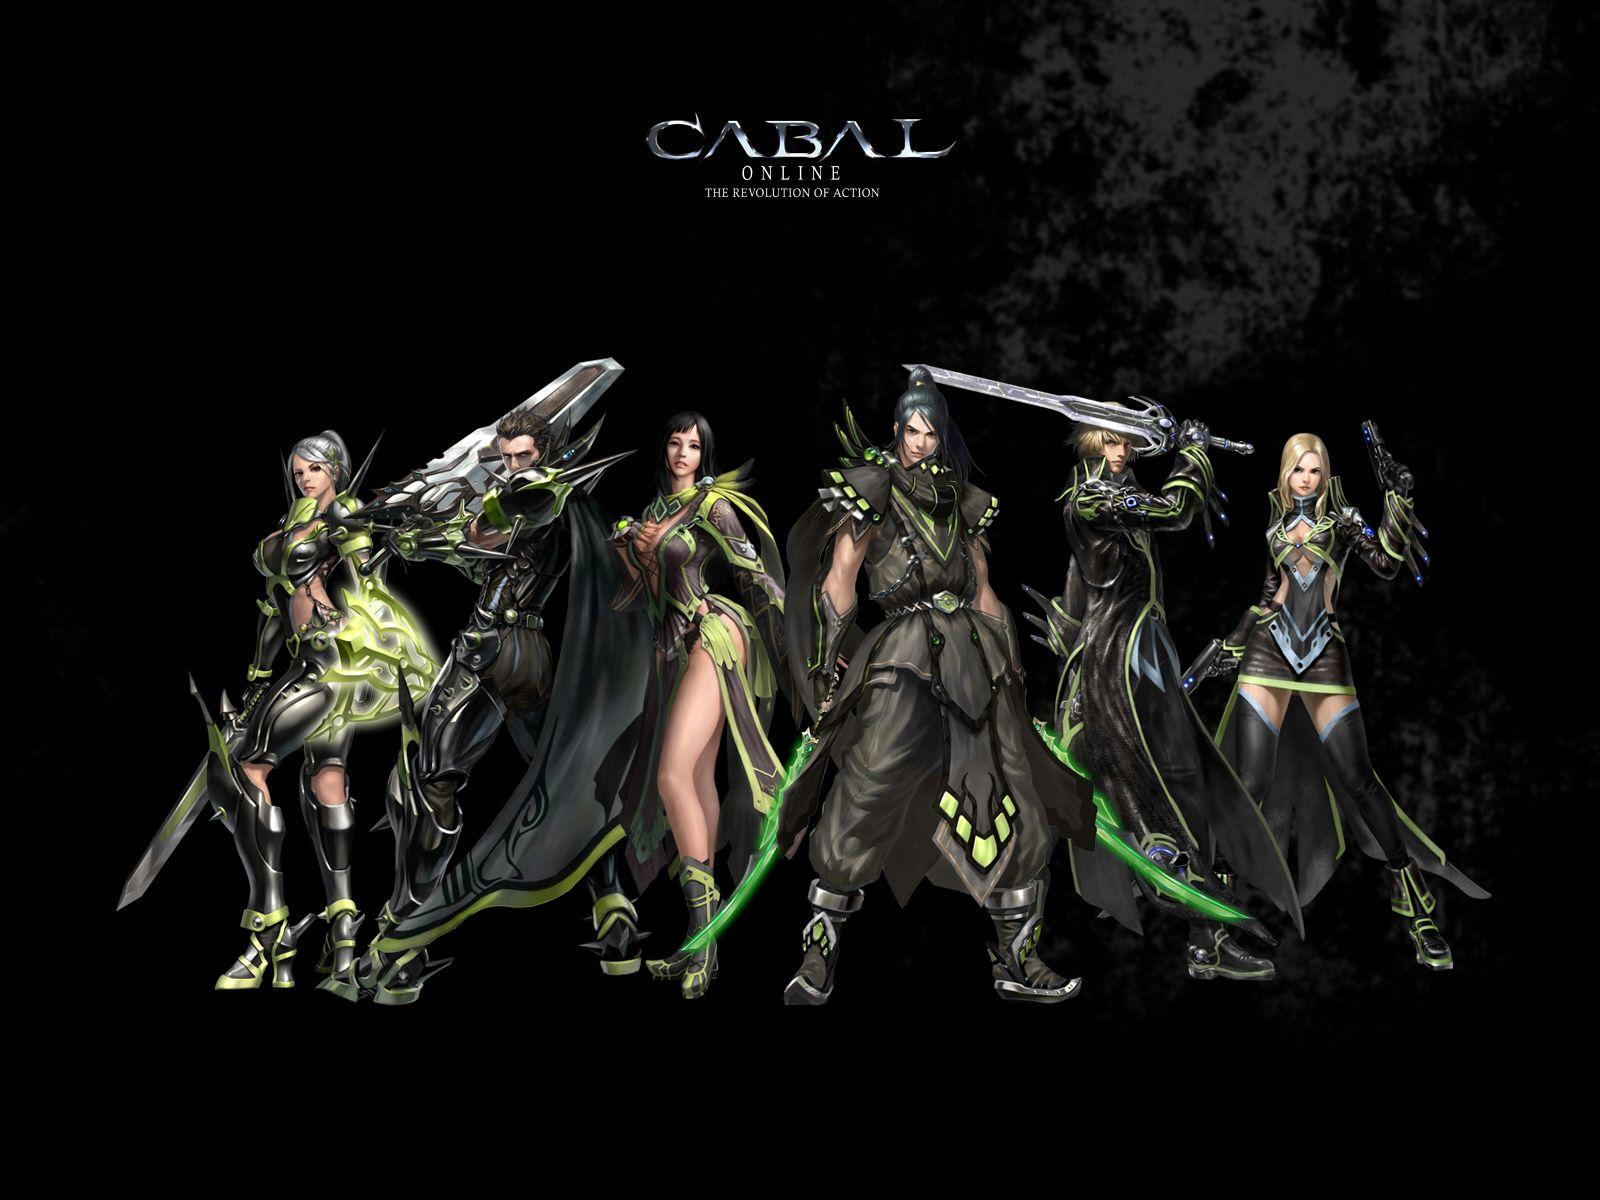 Cabal Wallpaper, Adorable HDQ Background of Cabal, 50 Cabal High